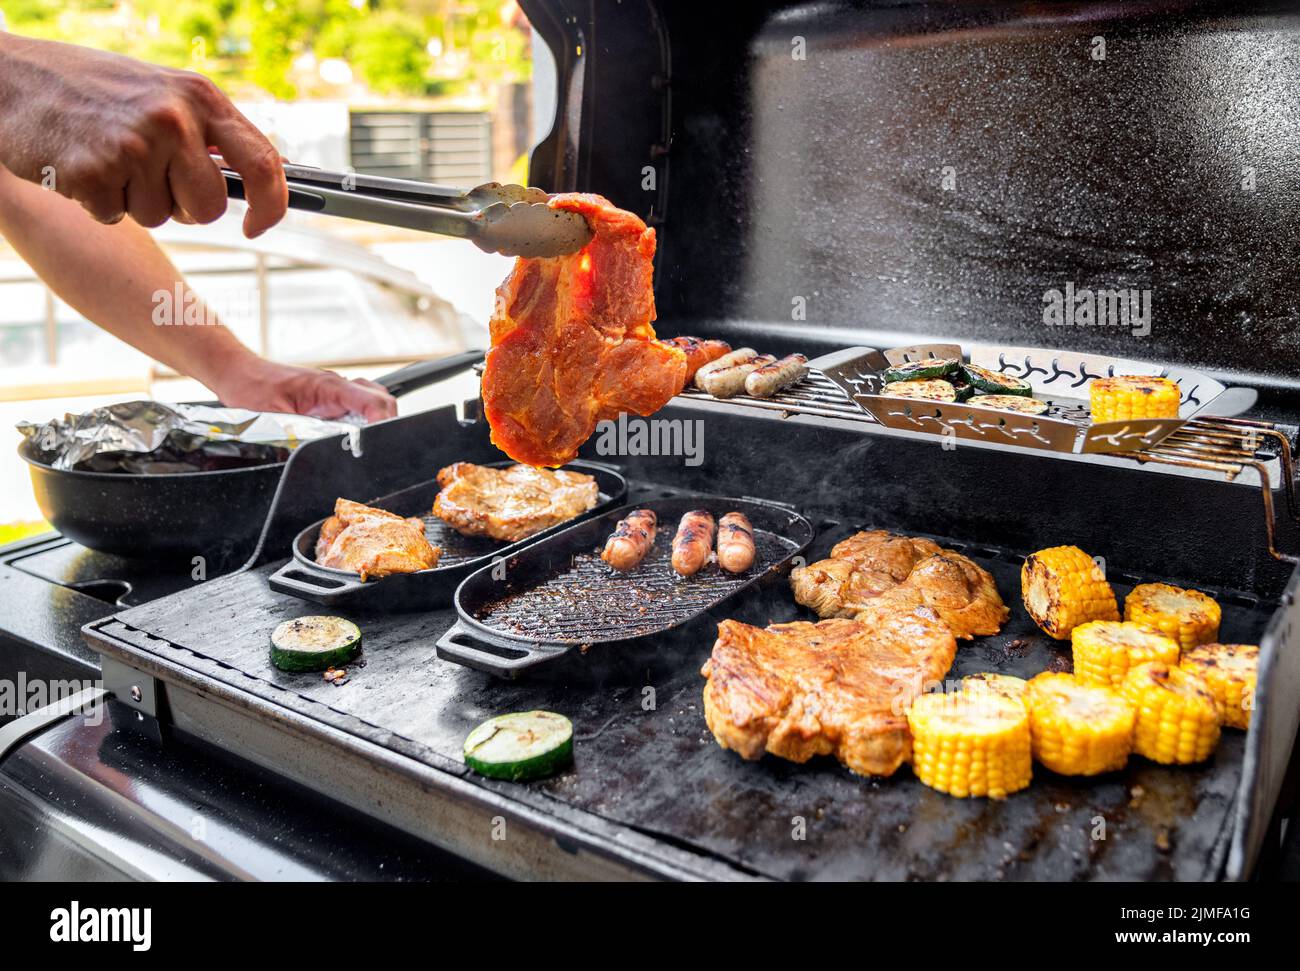 Beef steak and grill barbecue outdoors on the backyard. Bbq party. Stock Photo